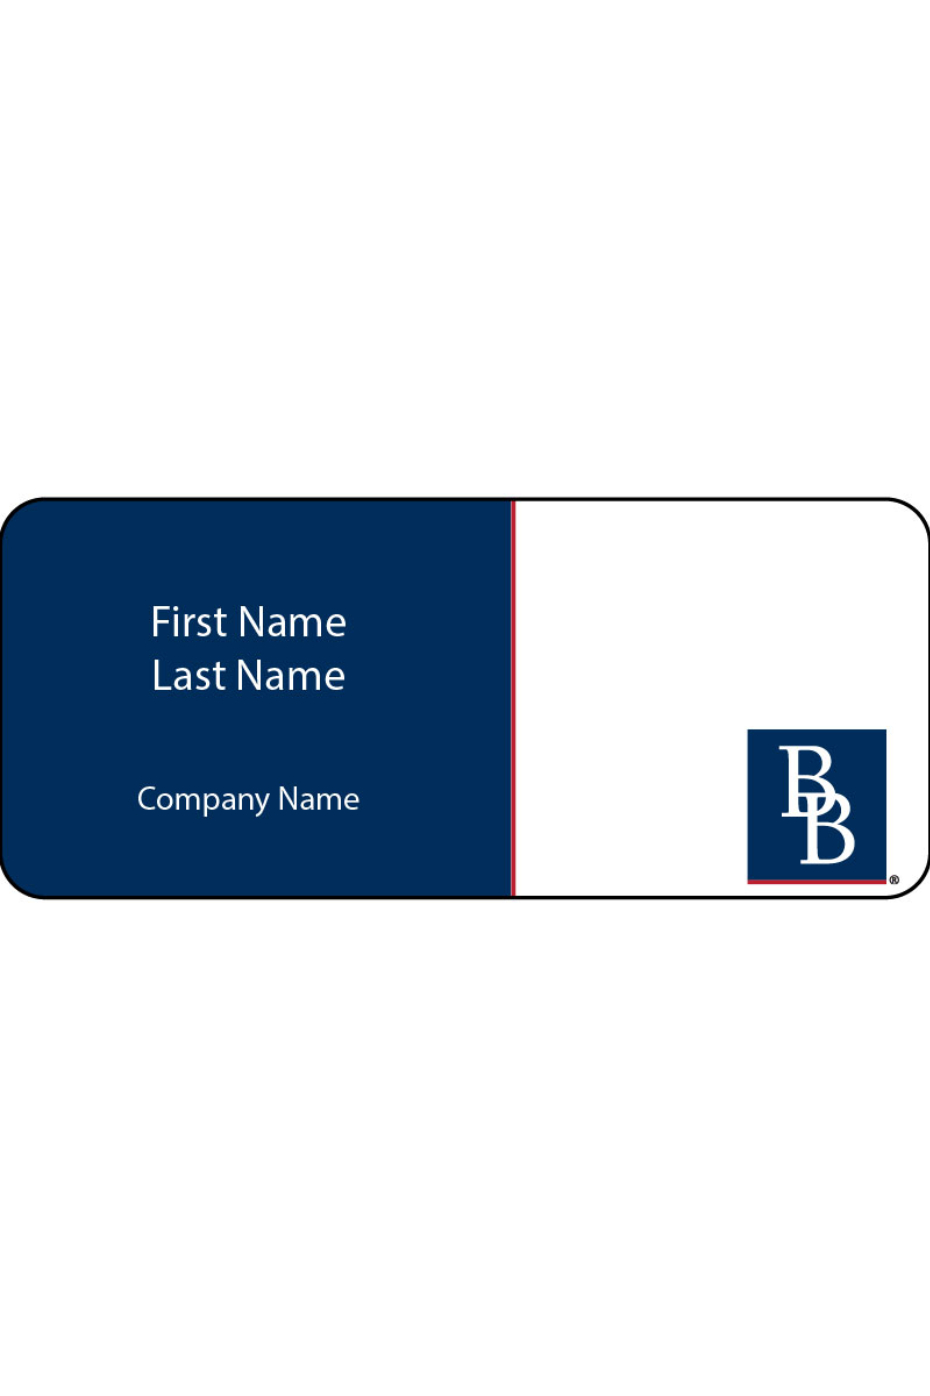 B&B - Name Badges with Magnetic Holder